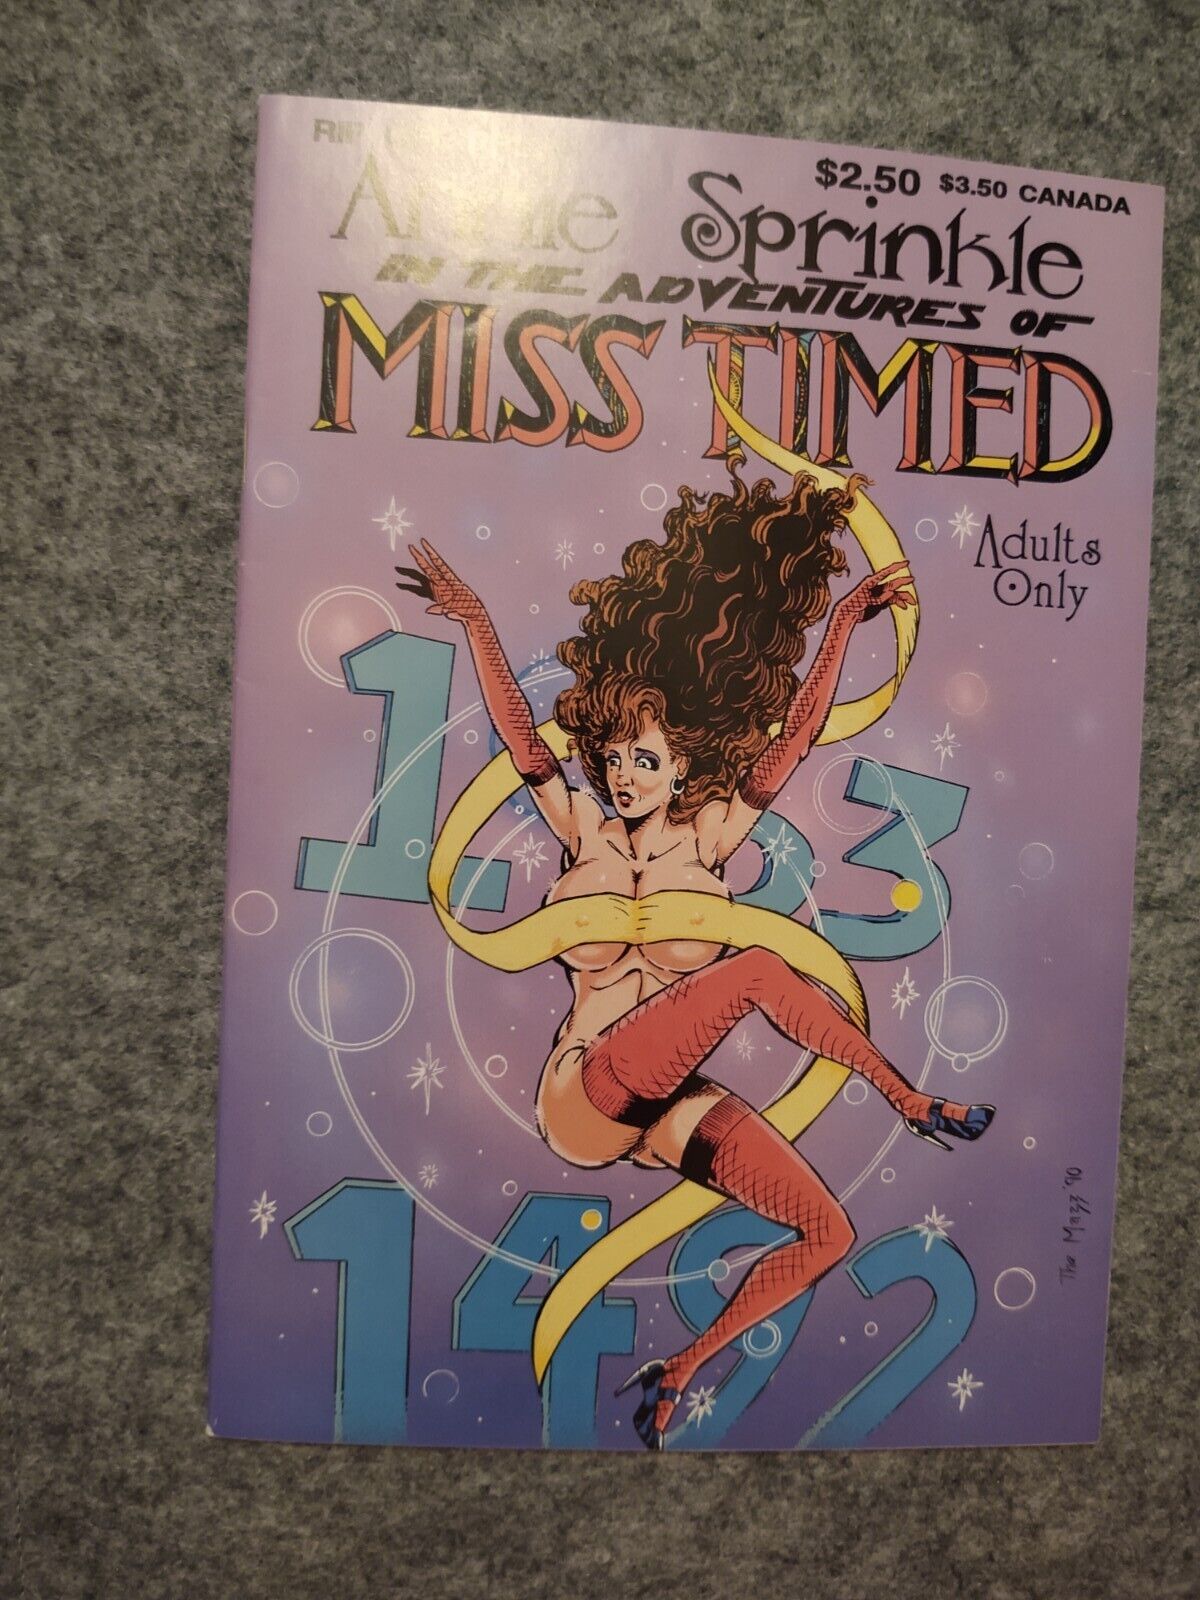 Annie Sprinkle Adventures of Miss Timed 1 1990 Rip Off Press good girl pin up